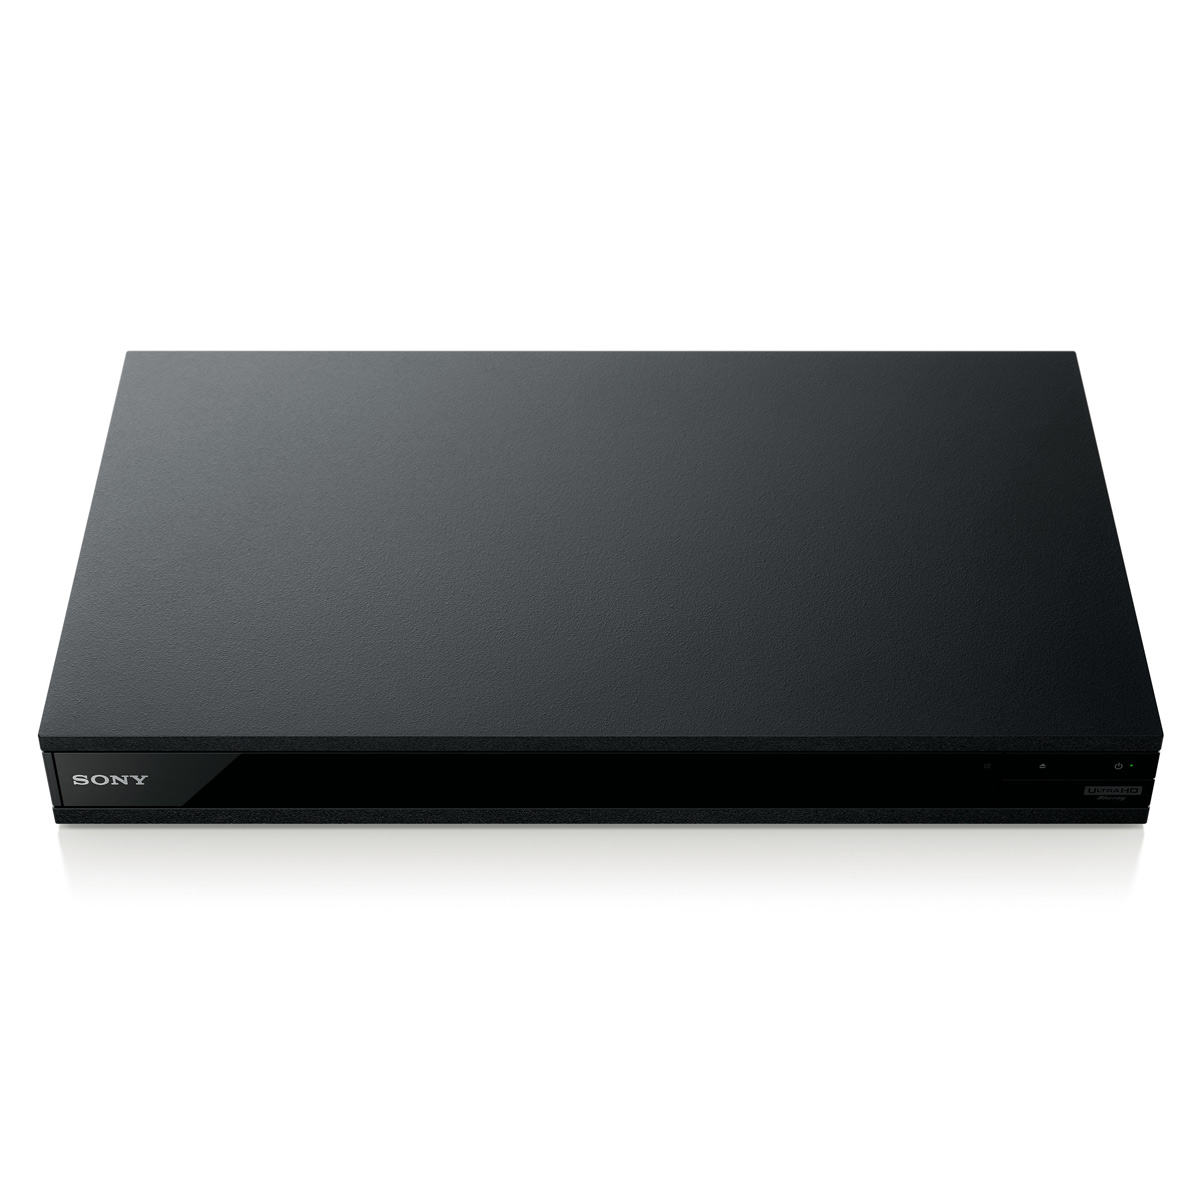 Sony UBP-X800M2 4K Ultra HD Home Theater Streaming Blu-Ray Player with High-Resolution Audio and Wi-Fi Built-In - image 3 of 6